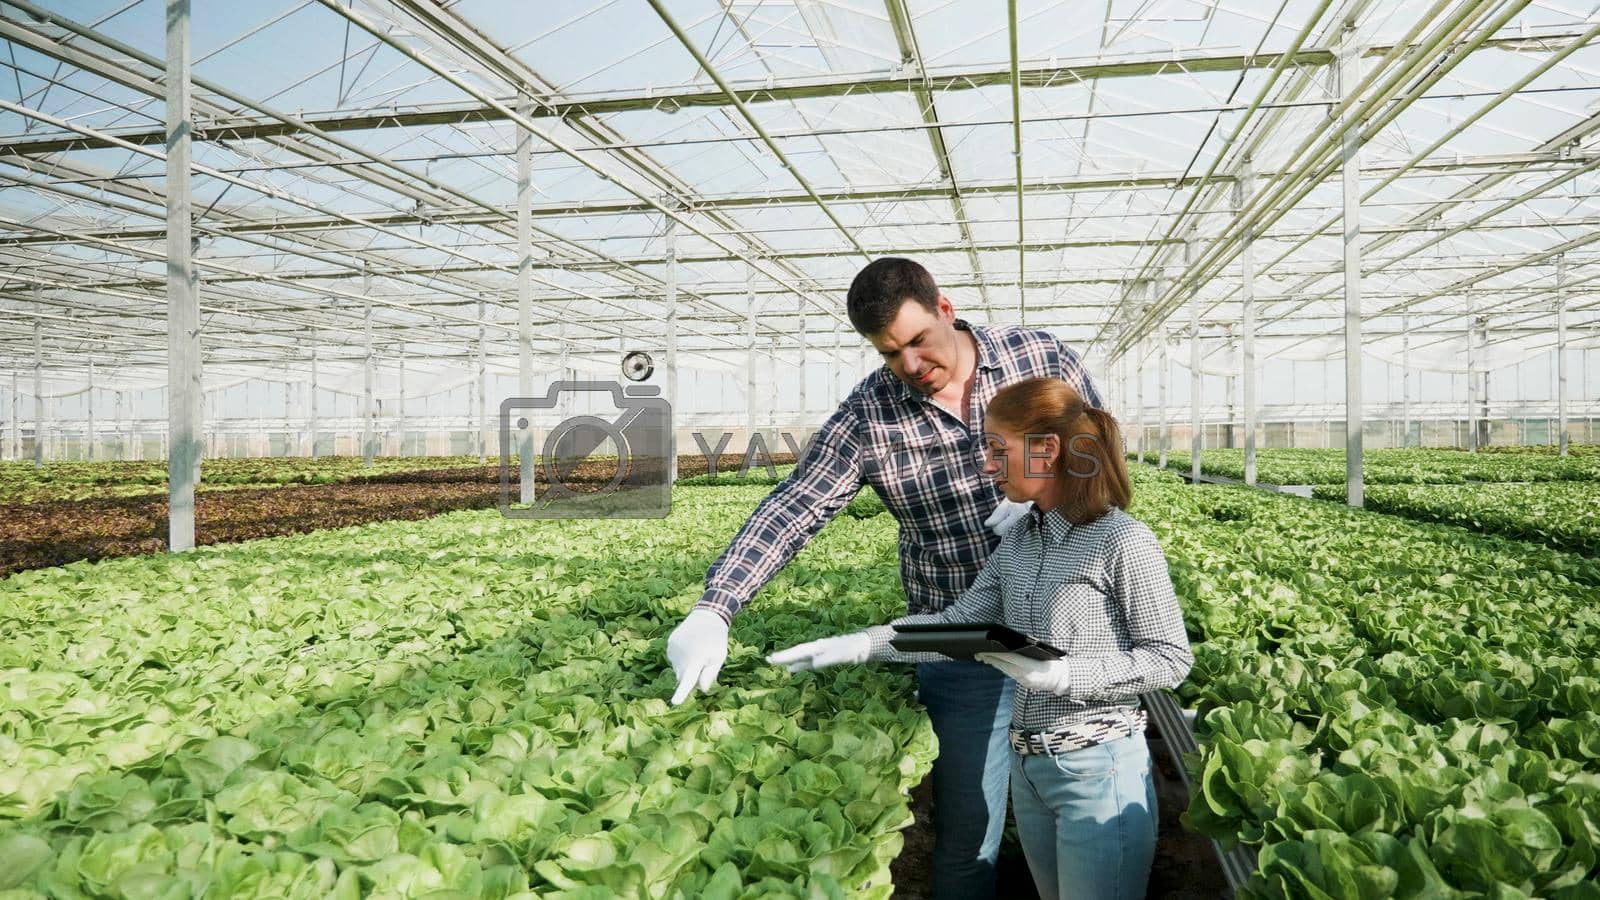 Gardeners people checking organic fresh salad during farming season in greenhouse. Agricultural grower woman typing plantation production on tablet. Concept of agronomy hydroponic farm